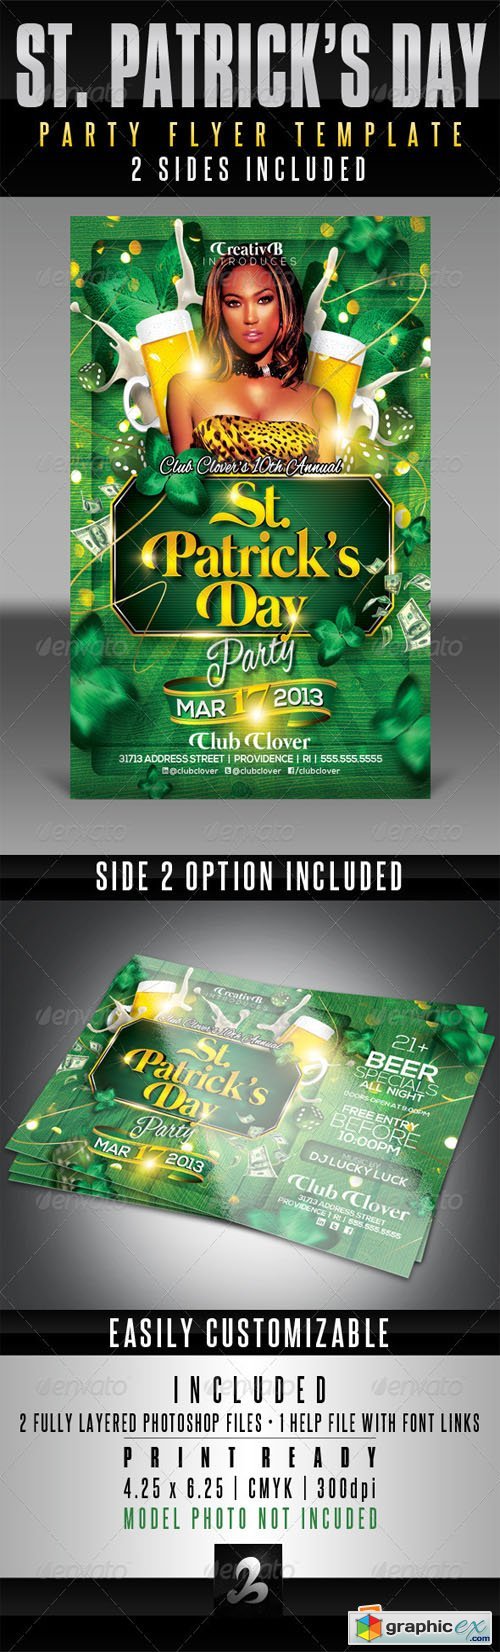 St. Patrick Day Party Flyer Template